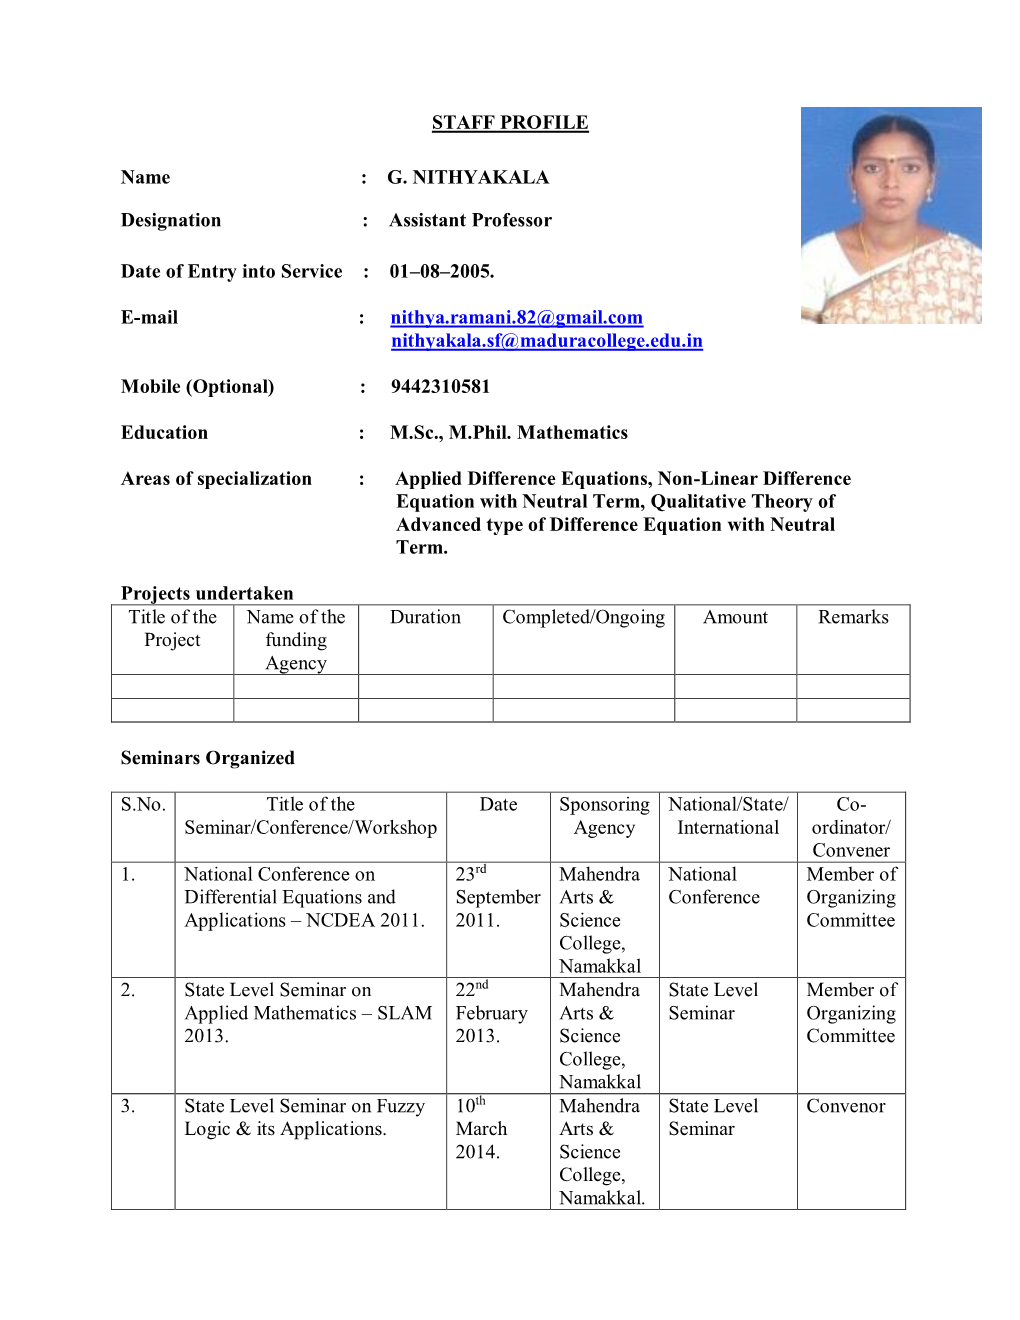 STAFF PROFILE Name : G. NITHYAKALA Designation : Assistant Professor Date of Entry Into Service : 01